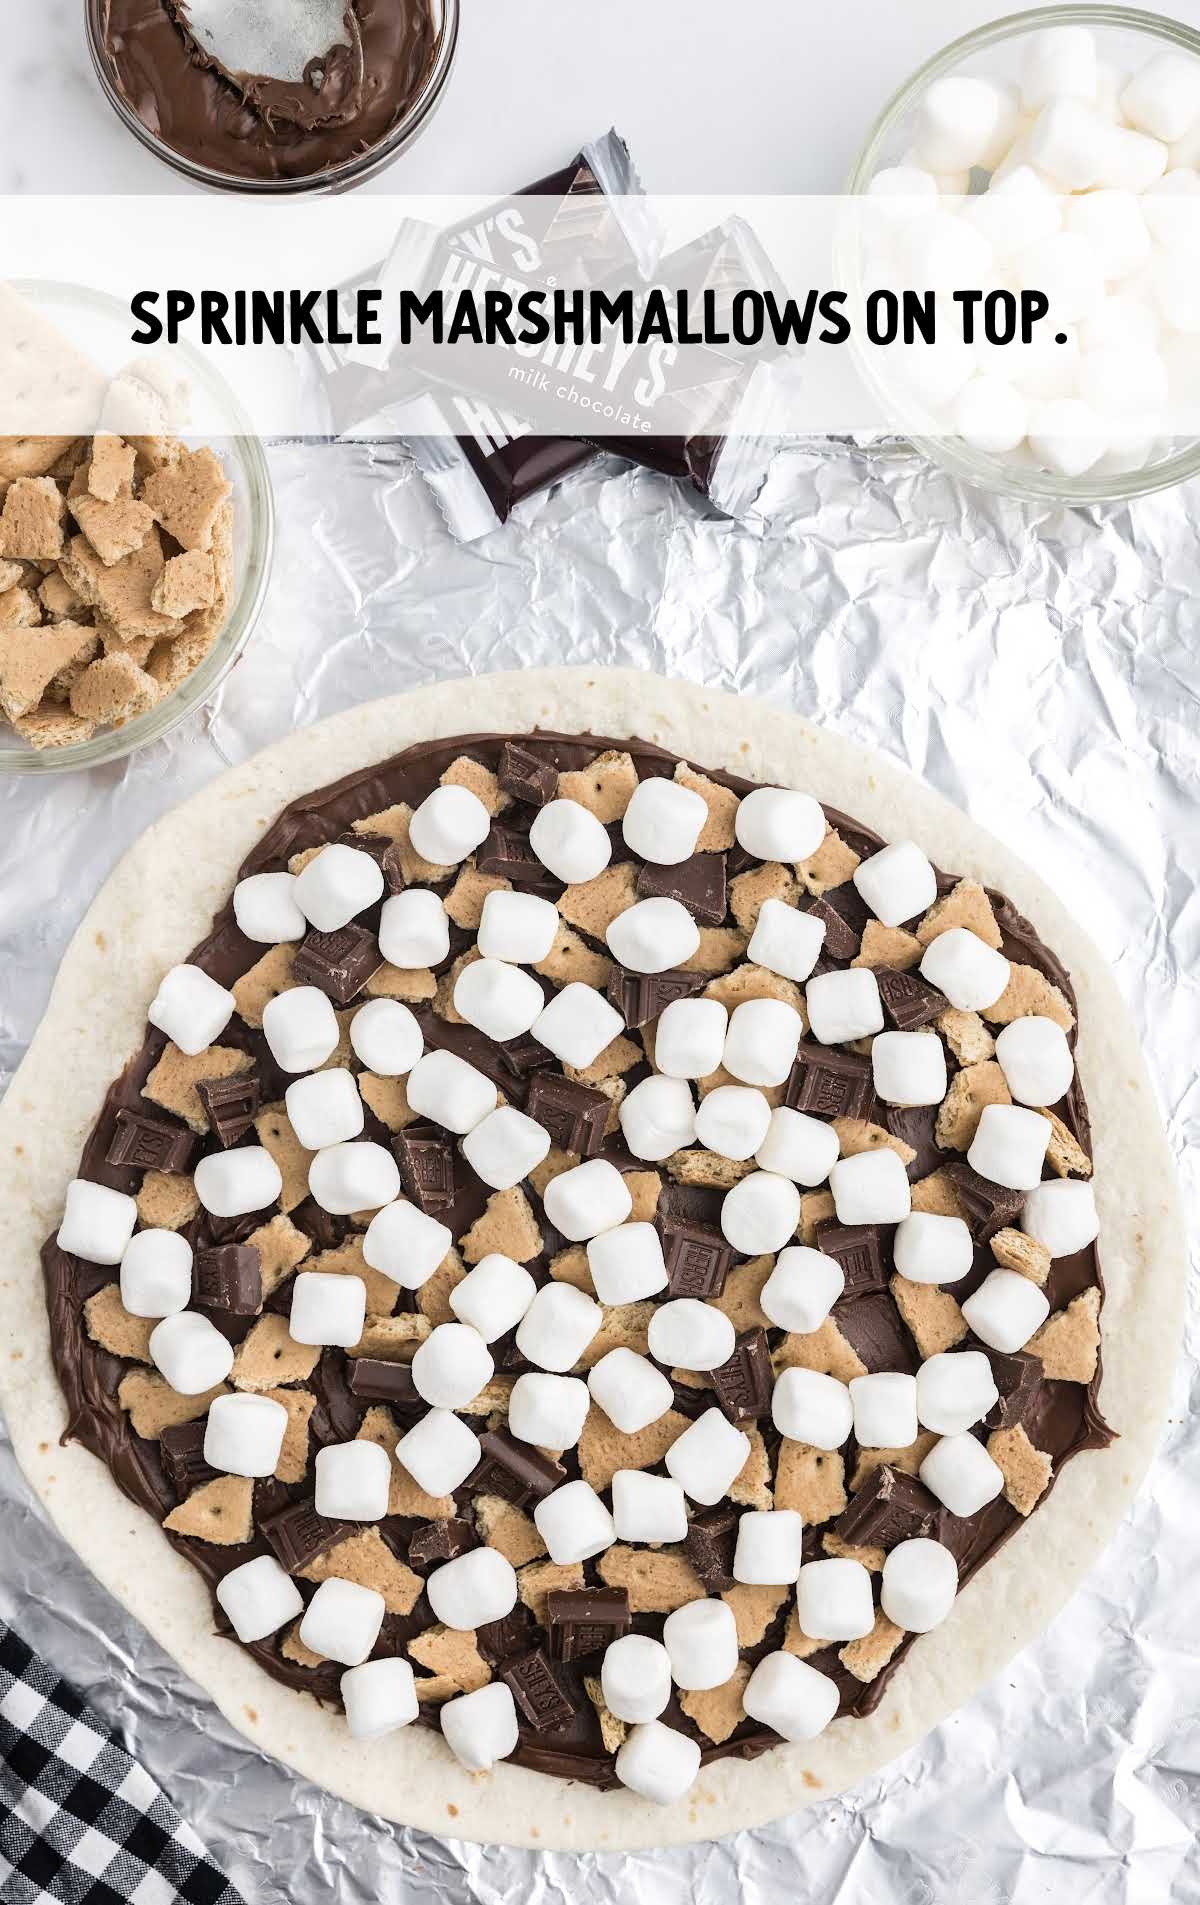 marshmallows spread on top of the dessert pizza